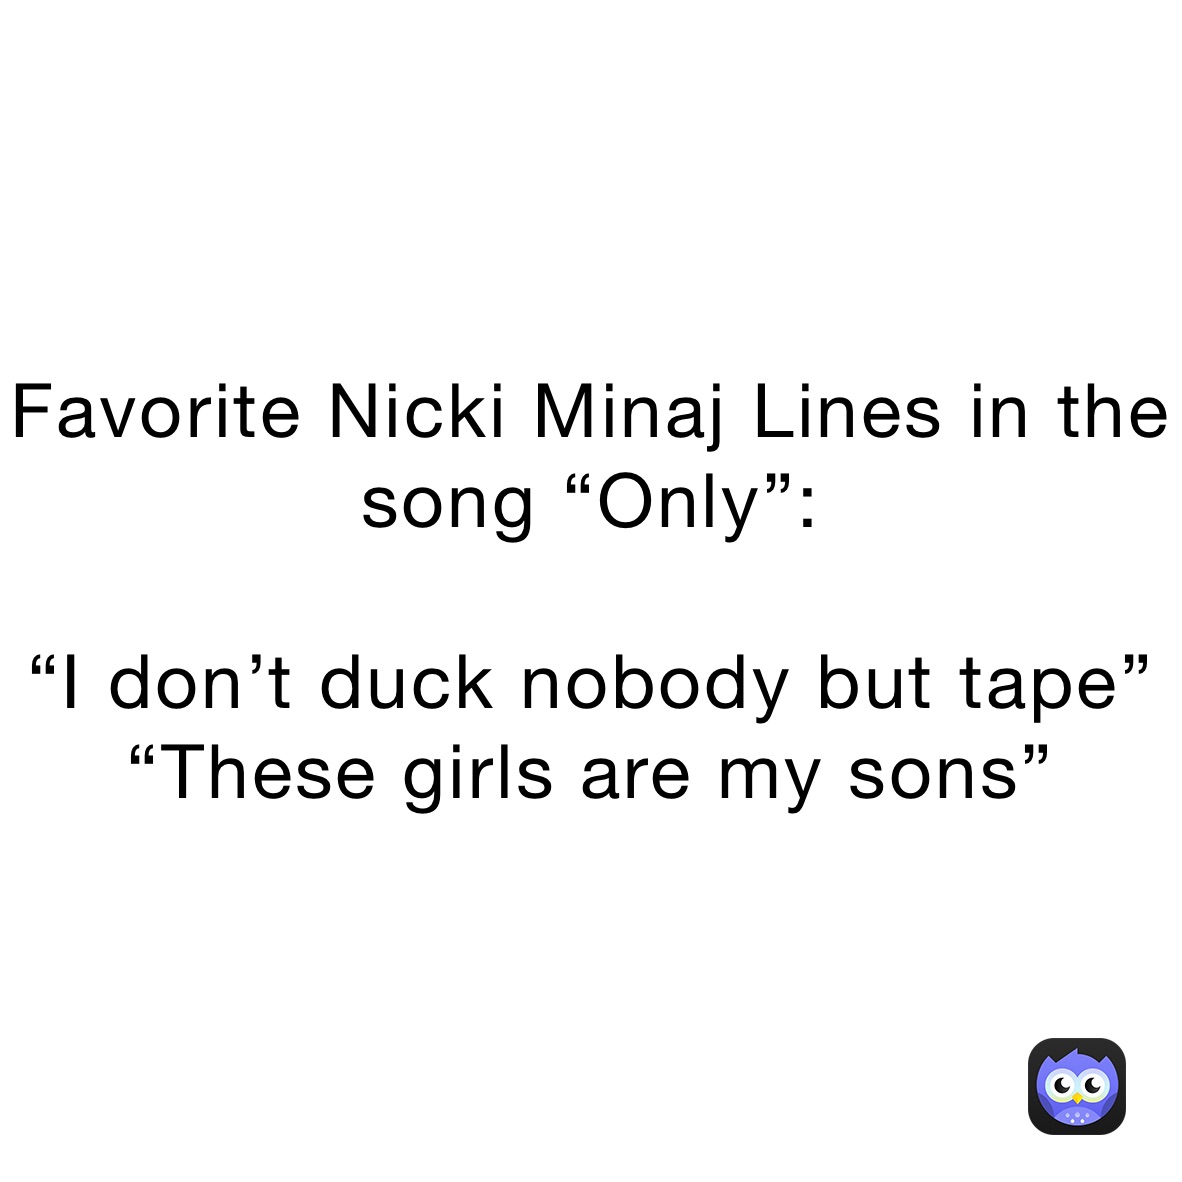 Favorite Nicki Minaj Lines in the song “Only”:

“I don’t duck nobody but tape”“These girls are my sons”